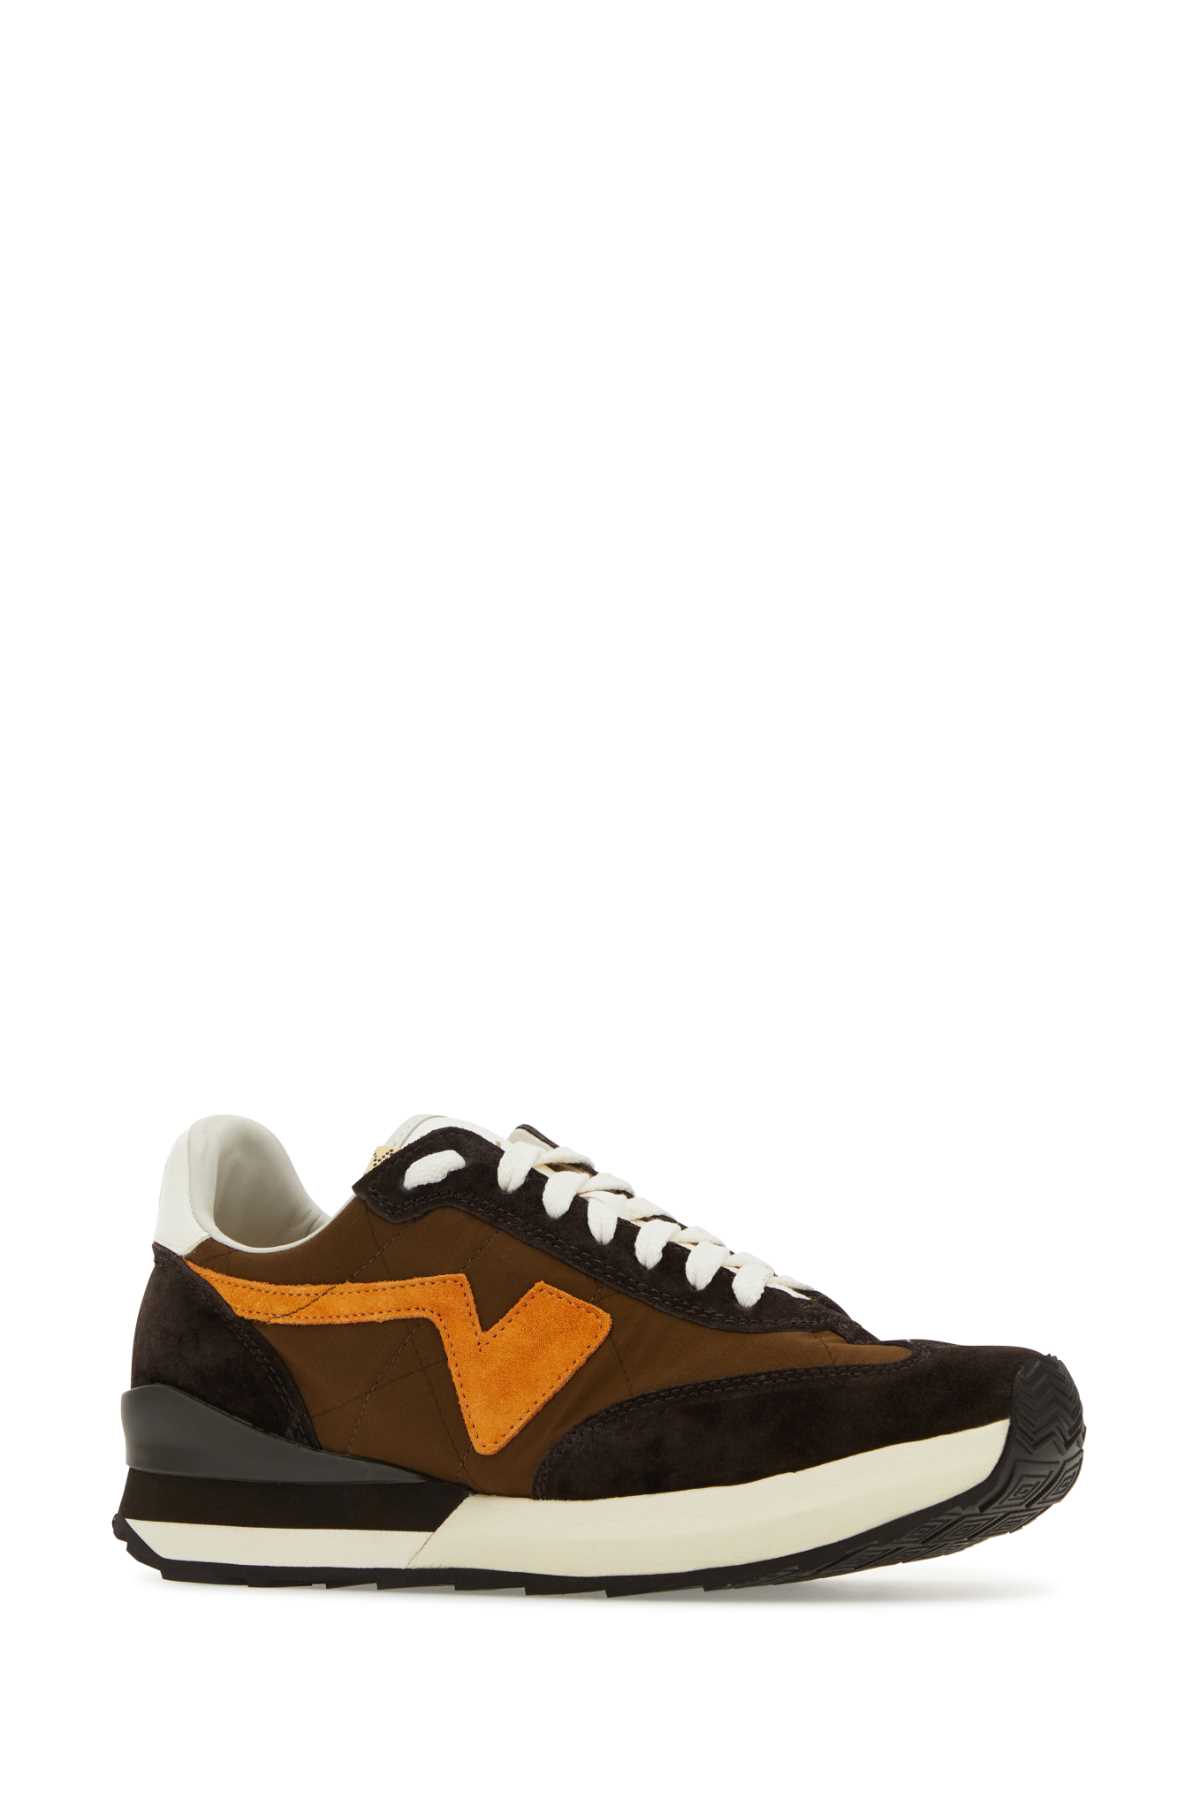 VISVIM MULTICOLOR FABRIC AND LEATHER FKT RUNNER SNEAKERS